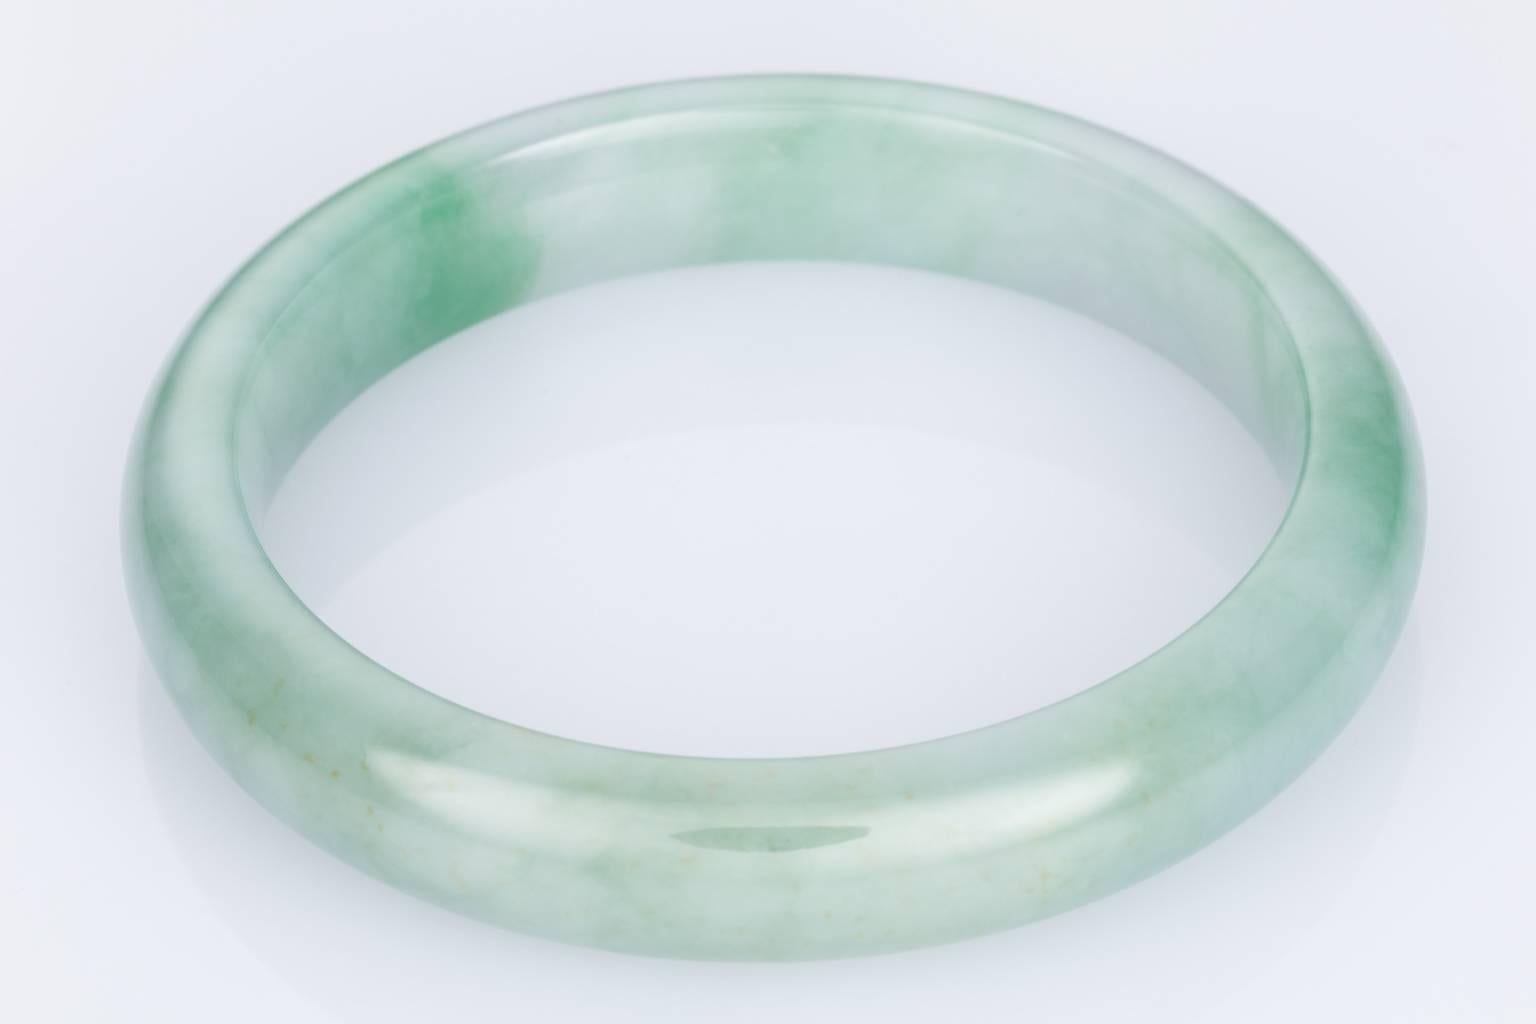 A natural Jade bangle with darker and lighter green tones throughout. 
Size is for a smaller wrist with the inner diameter measuring 5.2cm across. 
Has a heavy feel as the jade is quite dense.
Total weight is approximately 41 grams
